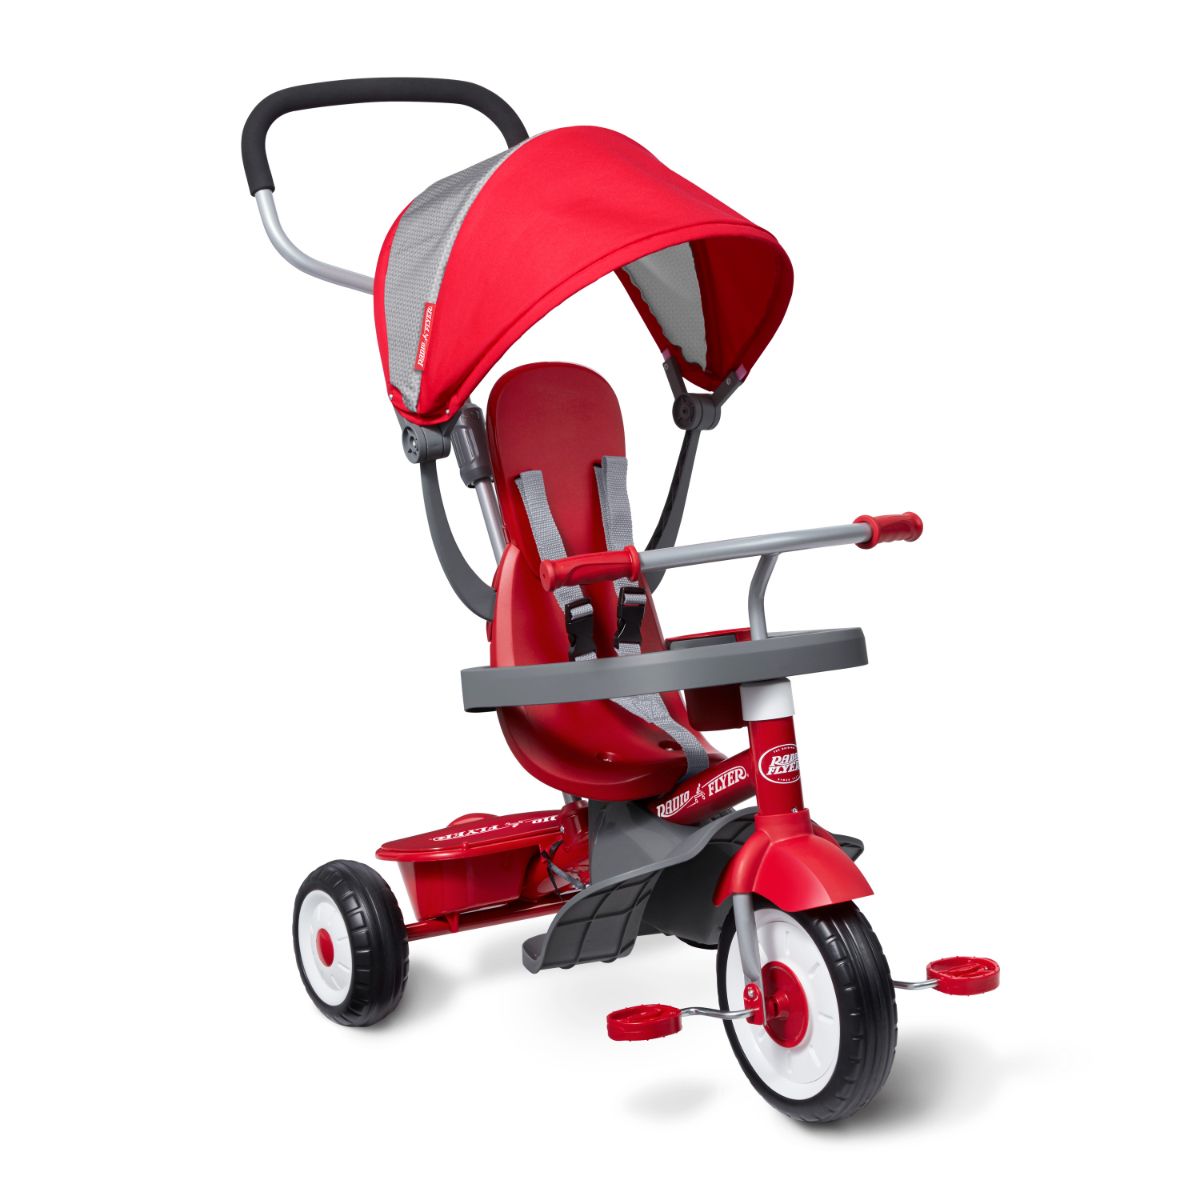 Radio flyer 4 in 1 trike Red